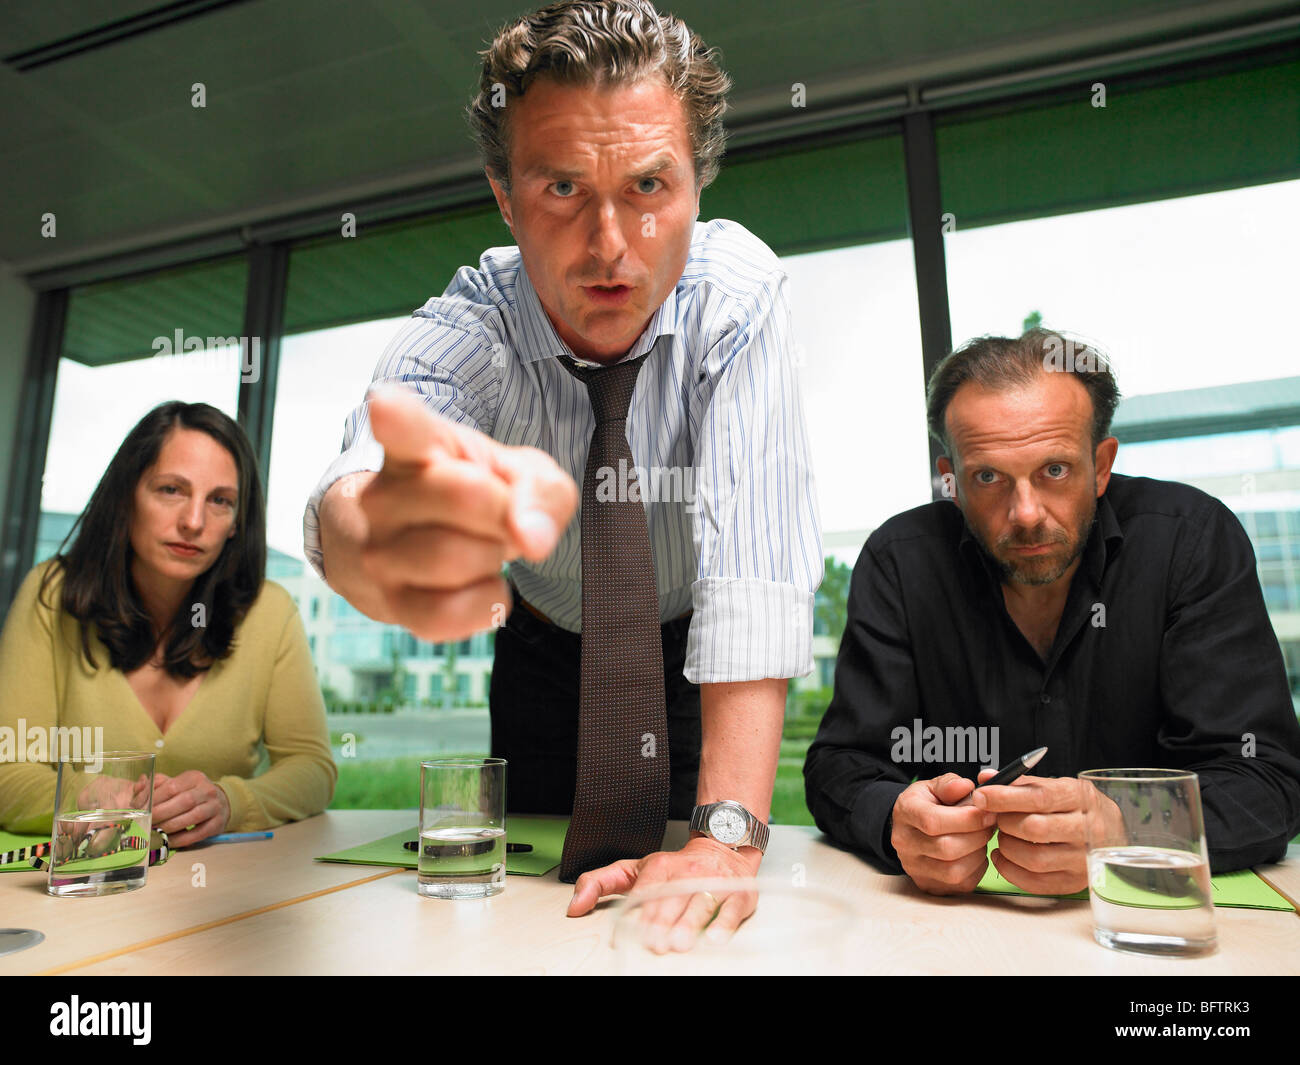 Business man angry with coworker Stock Photo